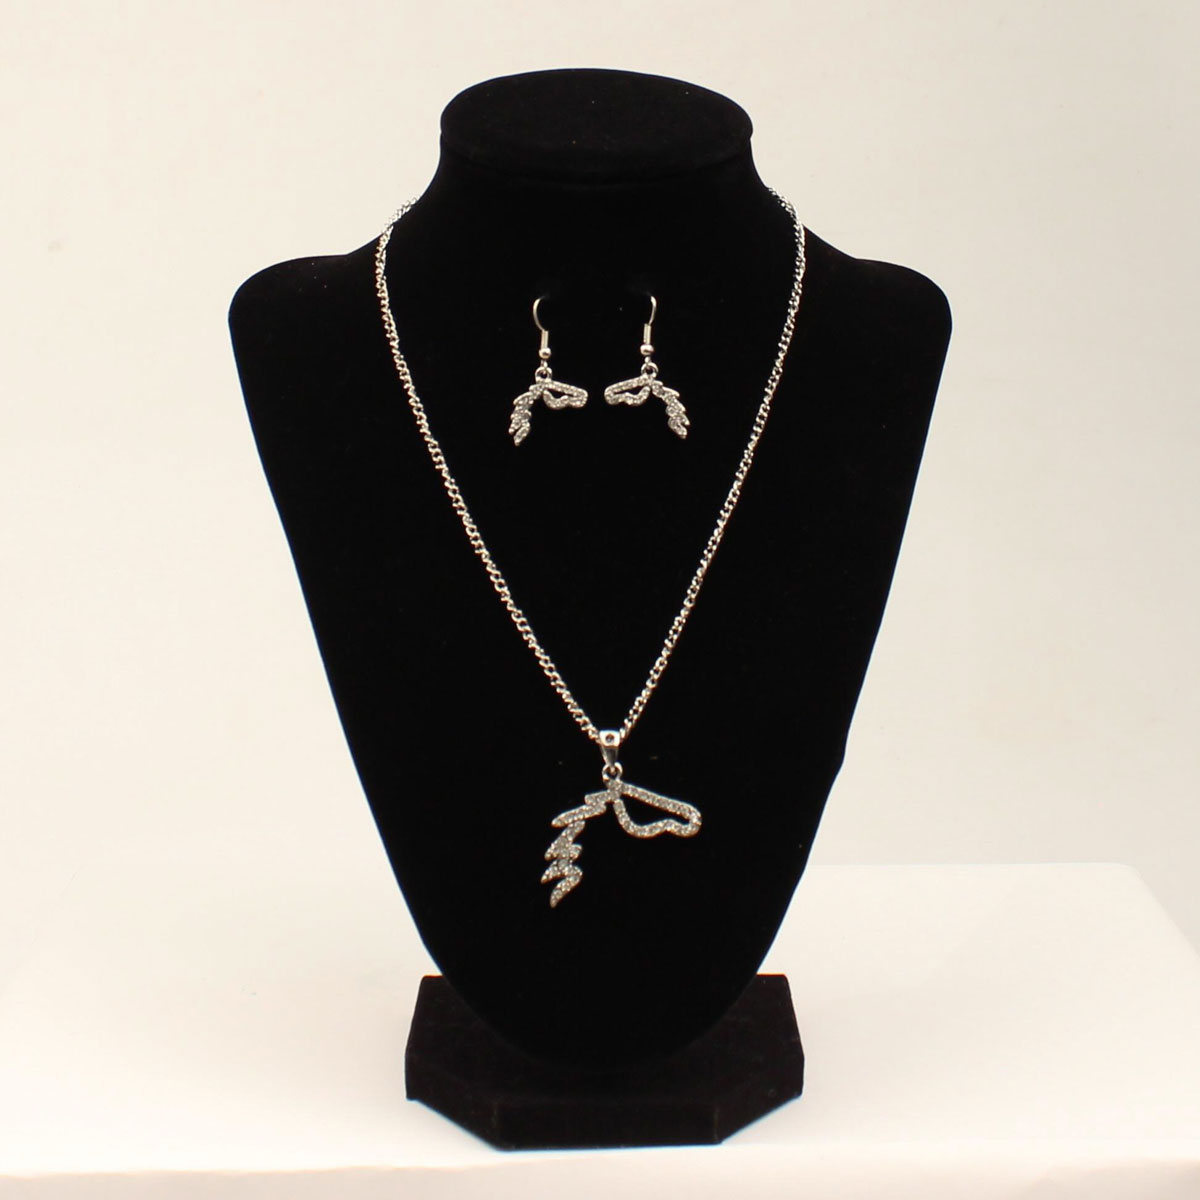 Den1320 Silver Tone Clear Horse Necklace Set - 0.75 In.